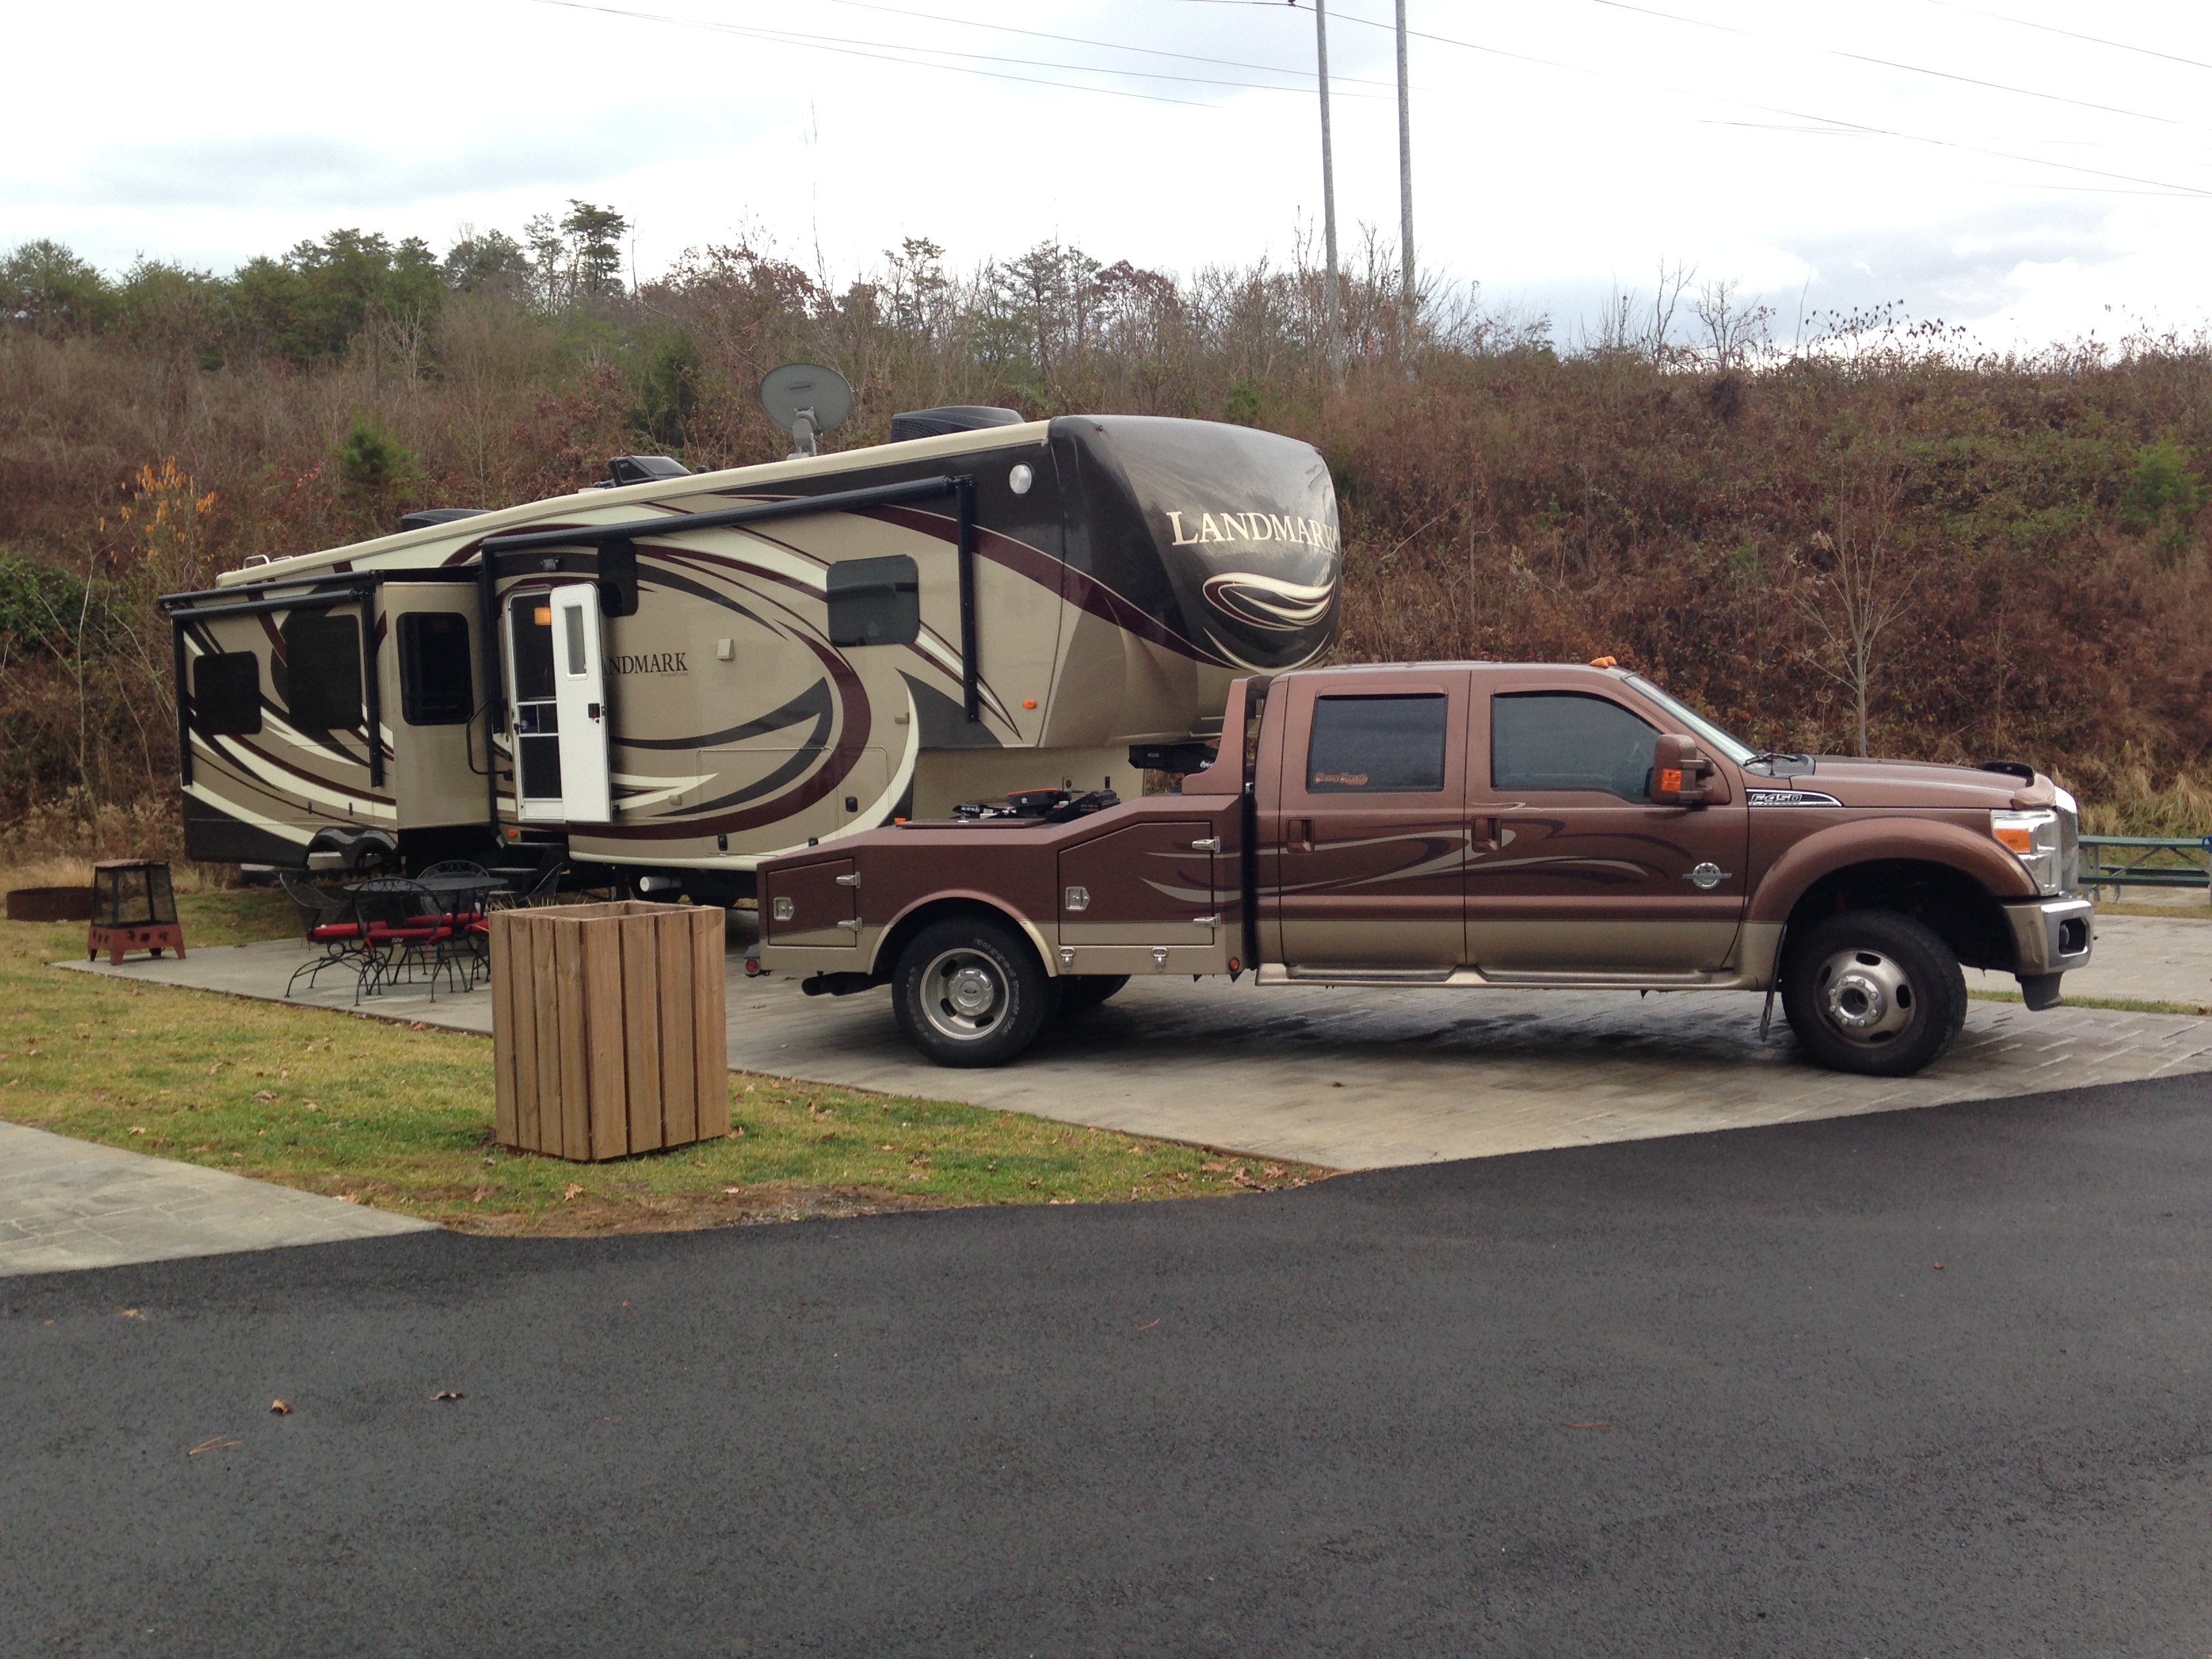 Site 48 - Bear Cove - Pigeon Forge, TN